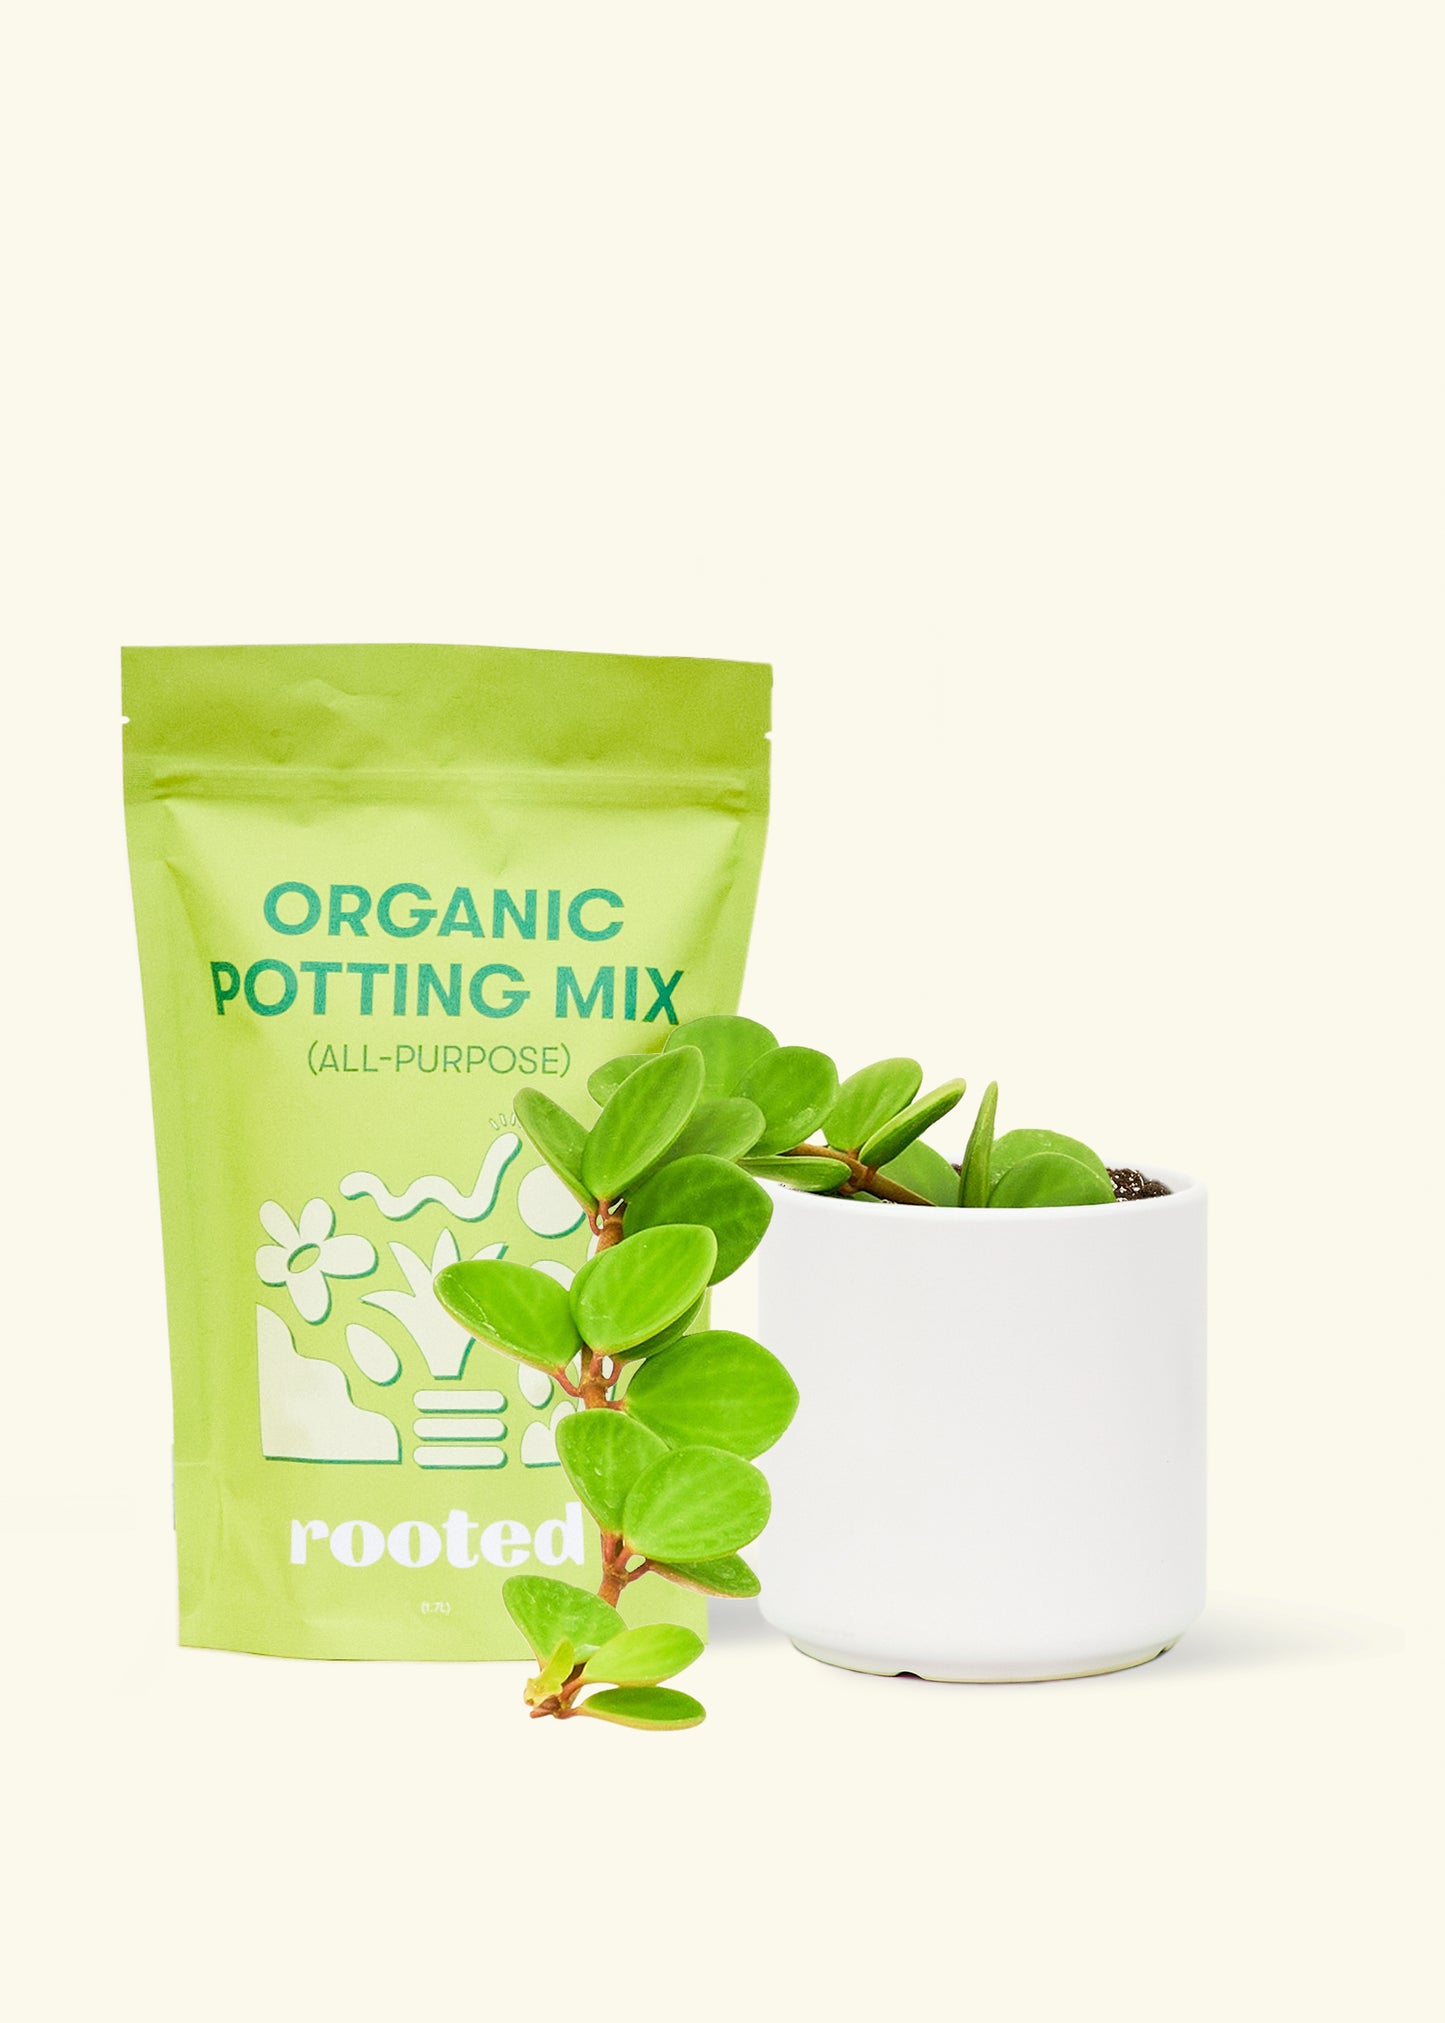 A bag of Organic Potting Mix to the left of a Peperomia 'Hope' in a white cylinder ceramic pot.